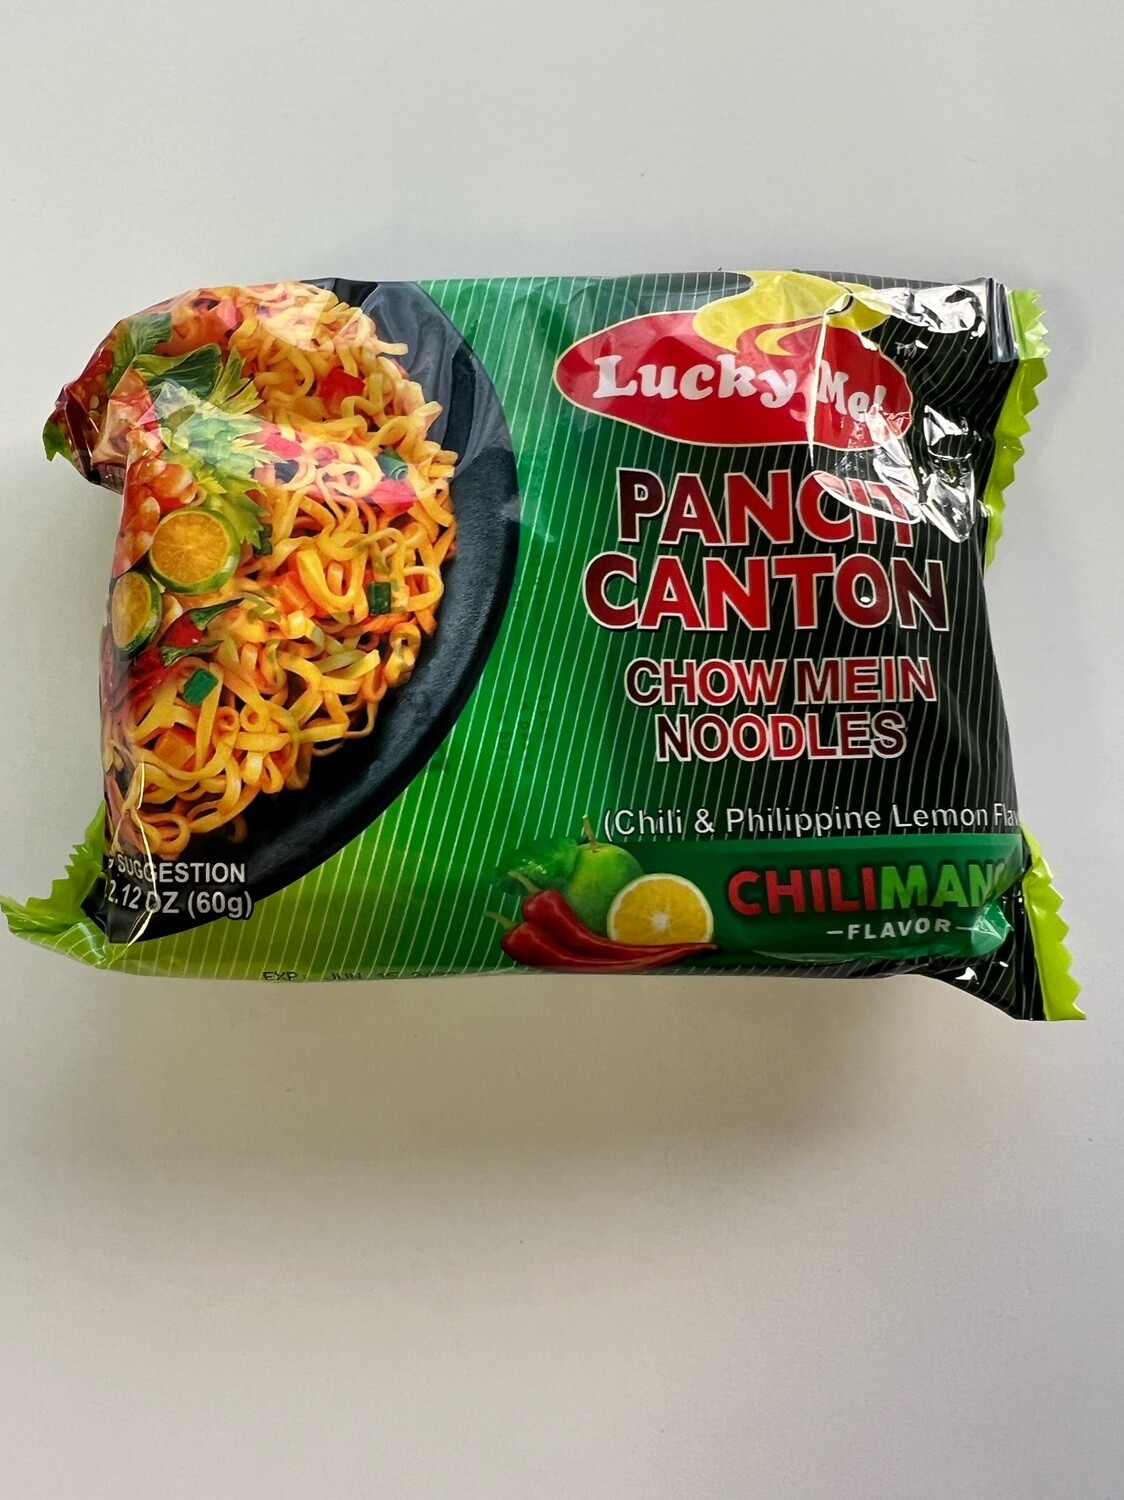 Lucky Me Pancit Canton Chilimansi